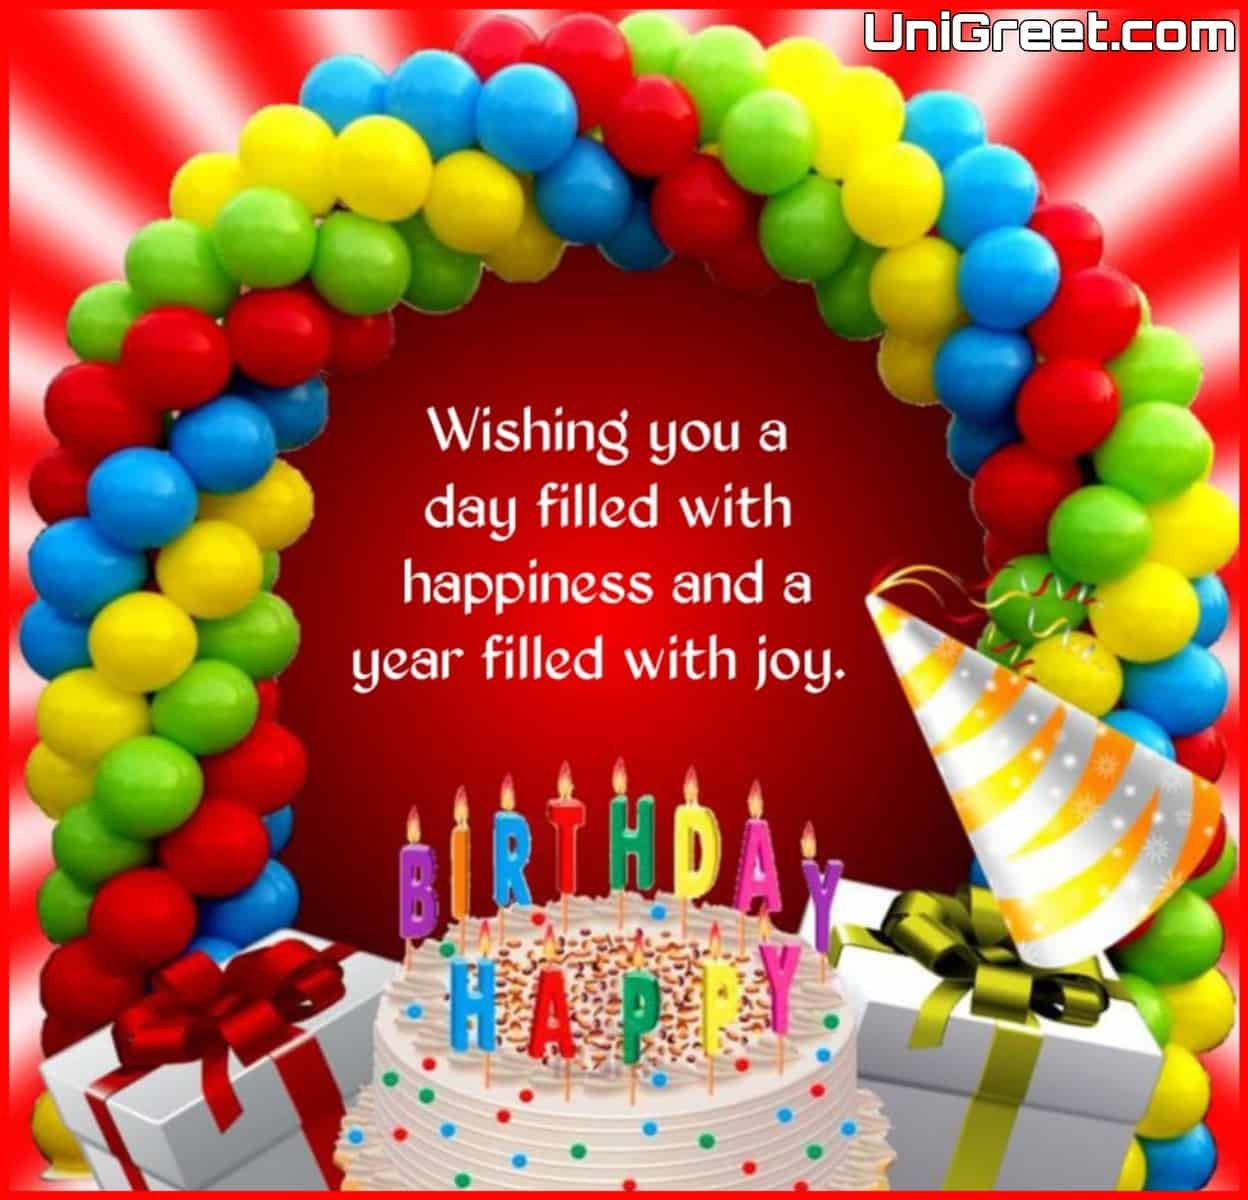 “Amazing Collection of Full 4K Happy Birthday Wishes Images – Over 999+ to Choose From!”